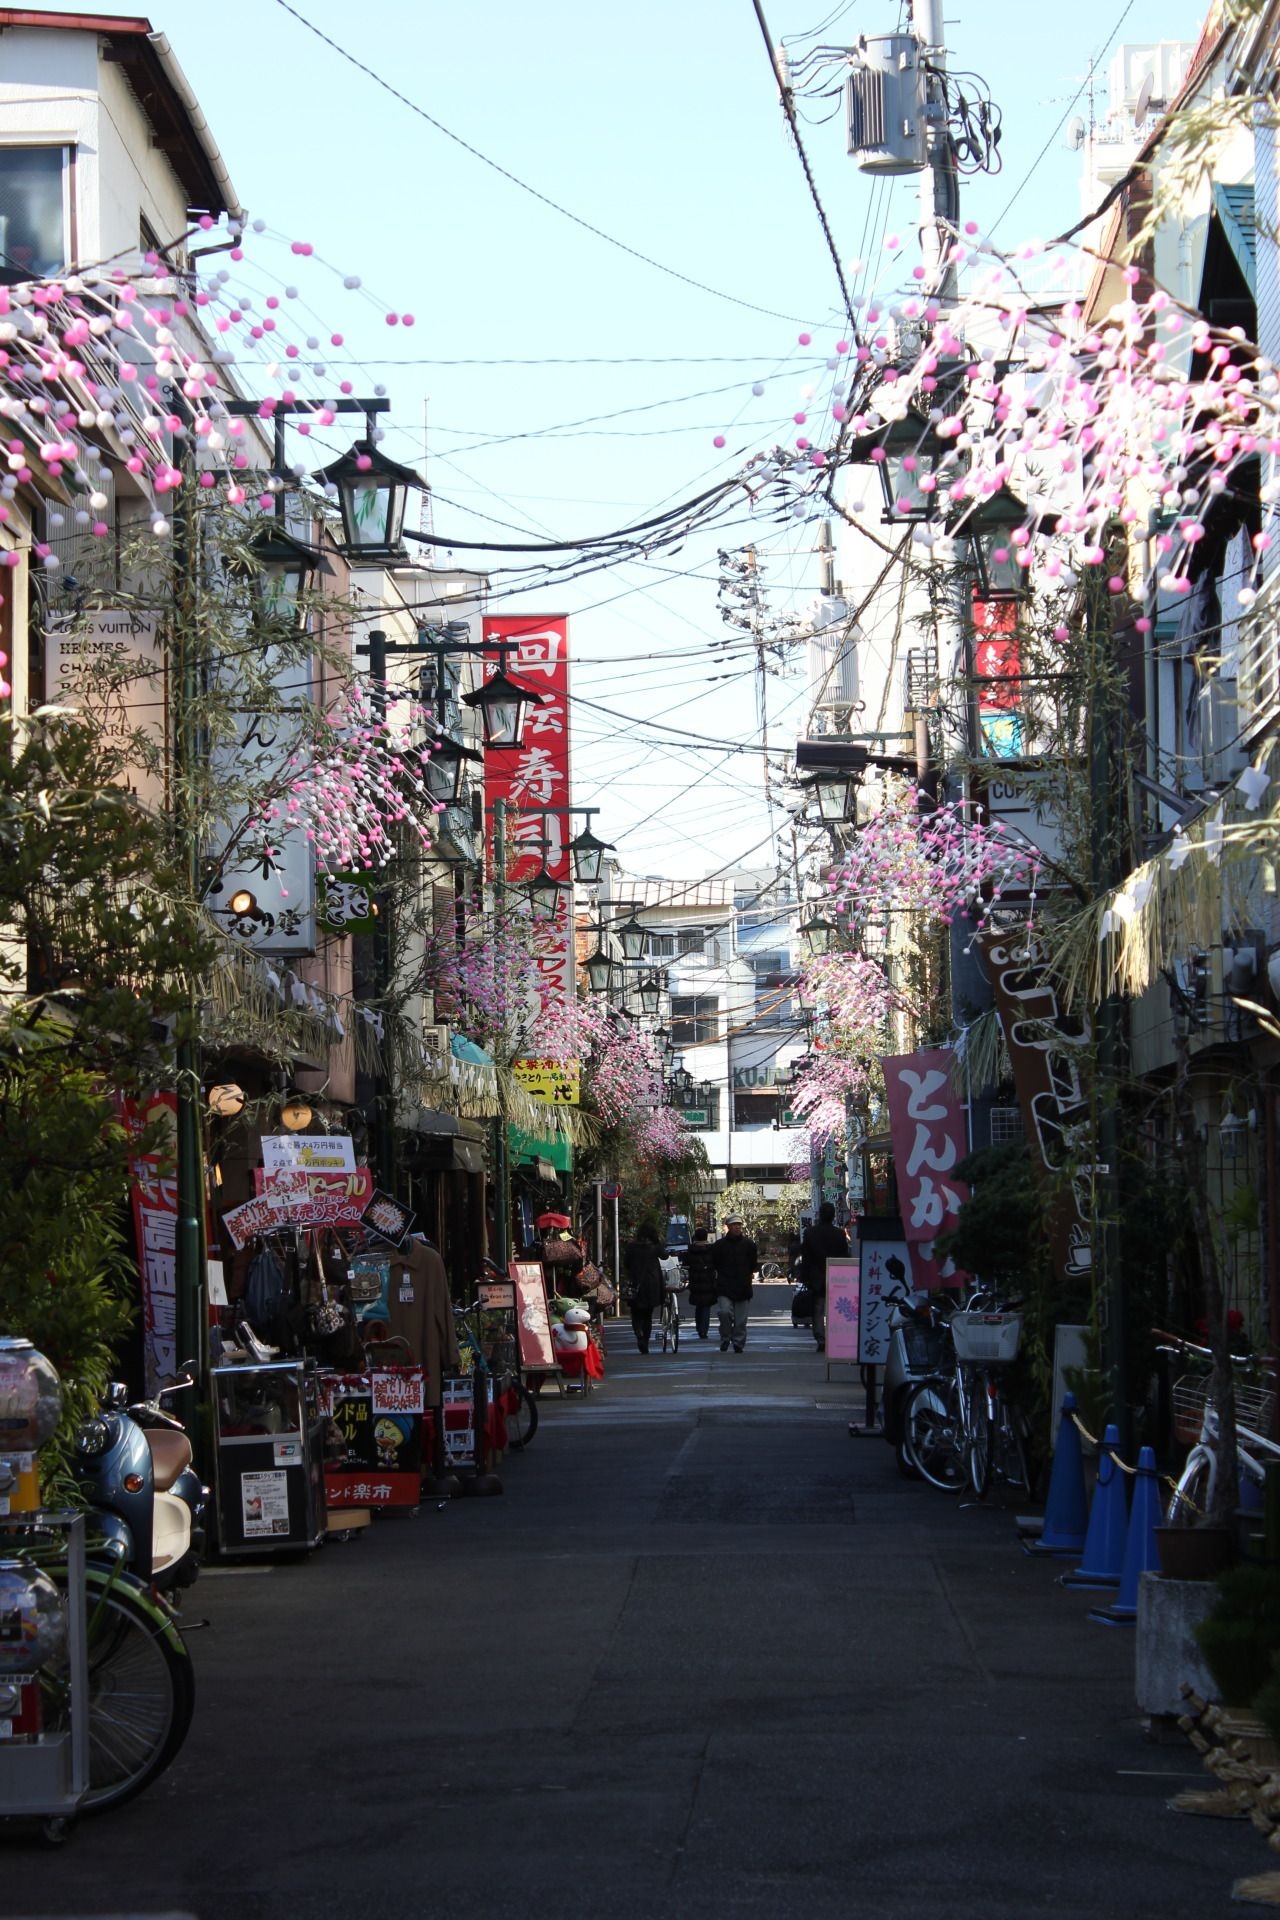 Alley: Market place and sidewalk in Japanese town, Chery blossom, Commuter town. 1280x1920 HD Wallpaper.